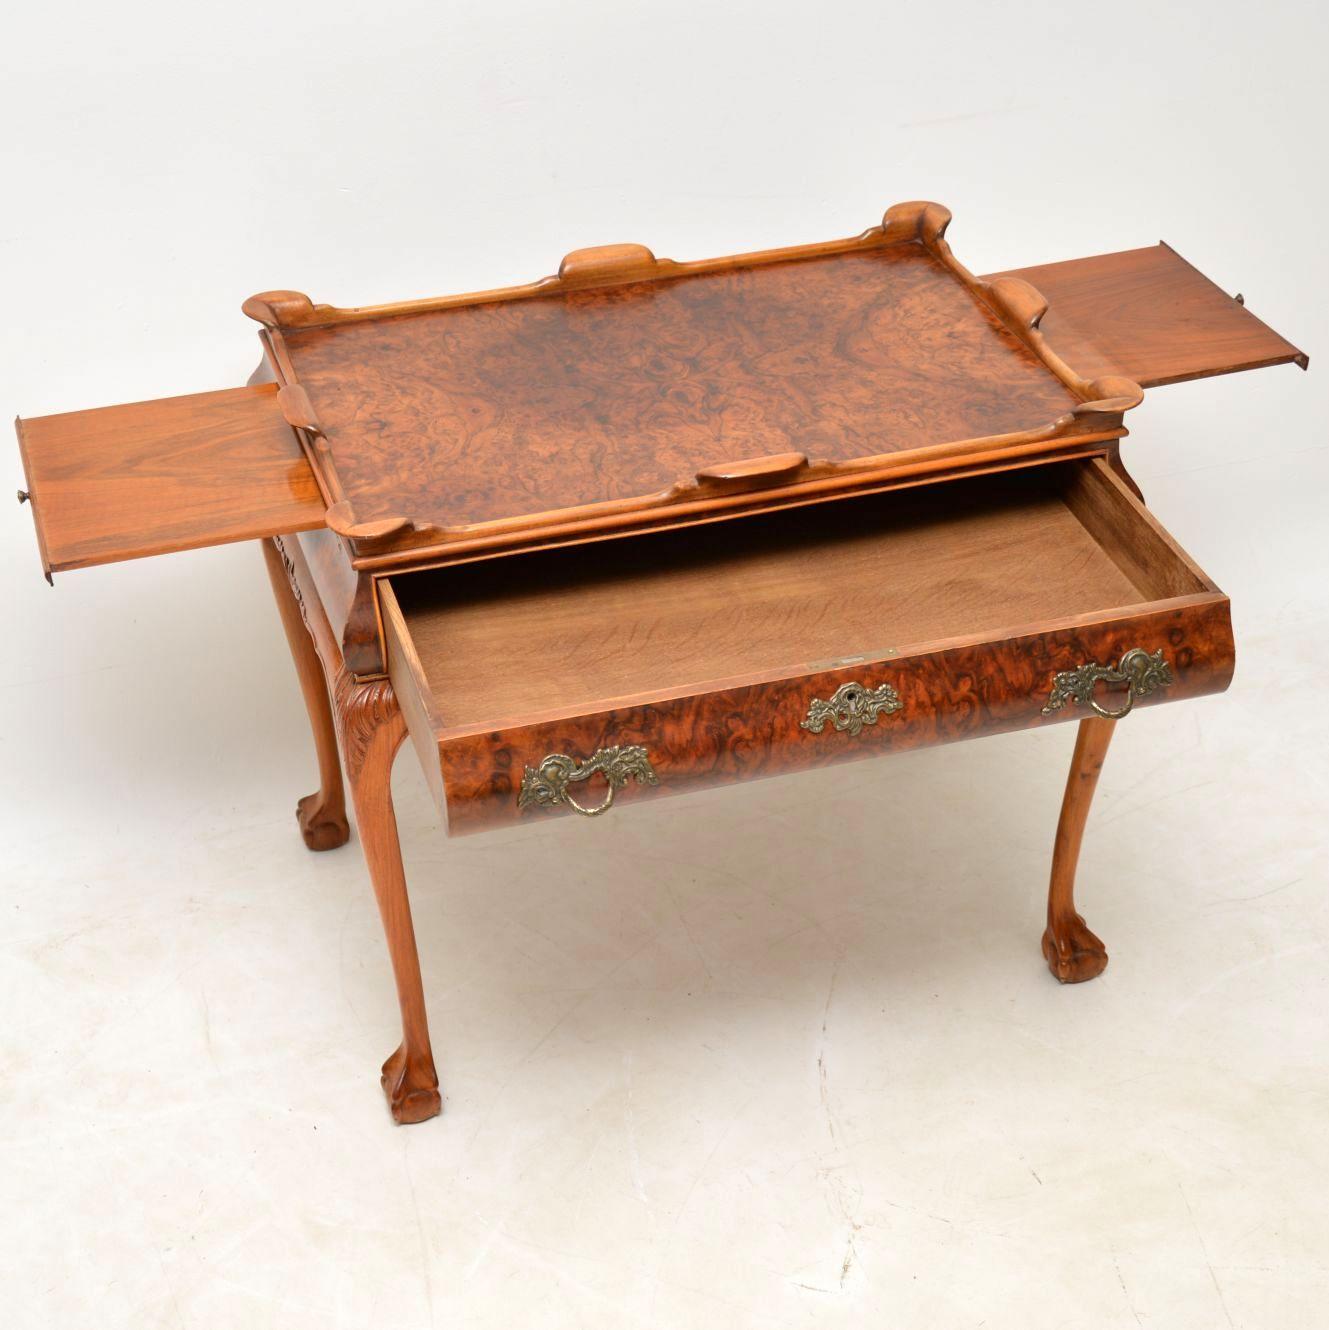 This antique walnut tray top side table is fine quality & has beautiful burr walnut patterns on & around the top. It’s Queen Anne style, dating from around the 1920’s period & is in excellent condition.

This table has some wonderful features, so